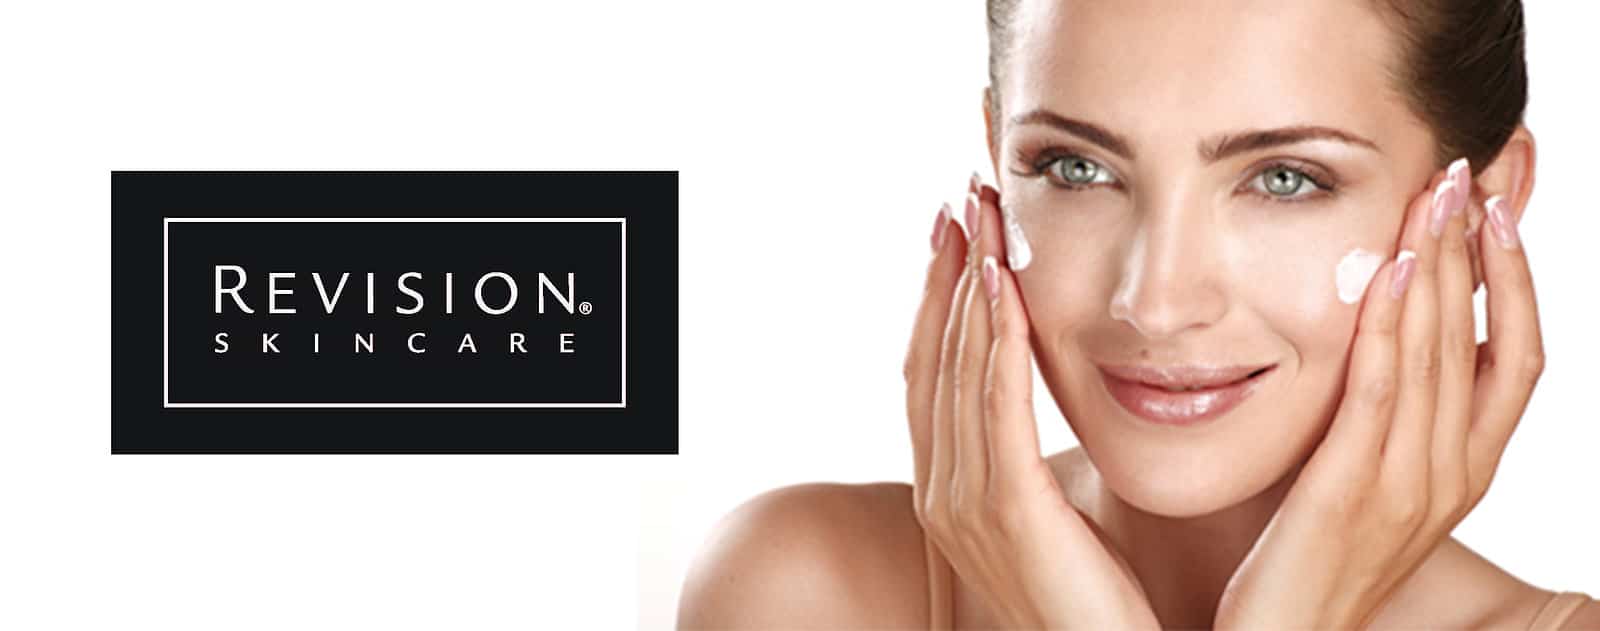 Revision Skincare has provided physicians with clinically proven